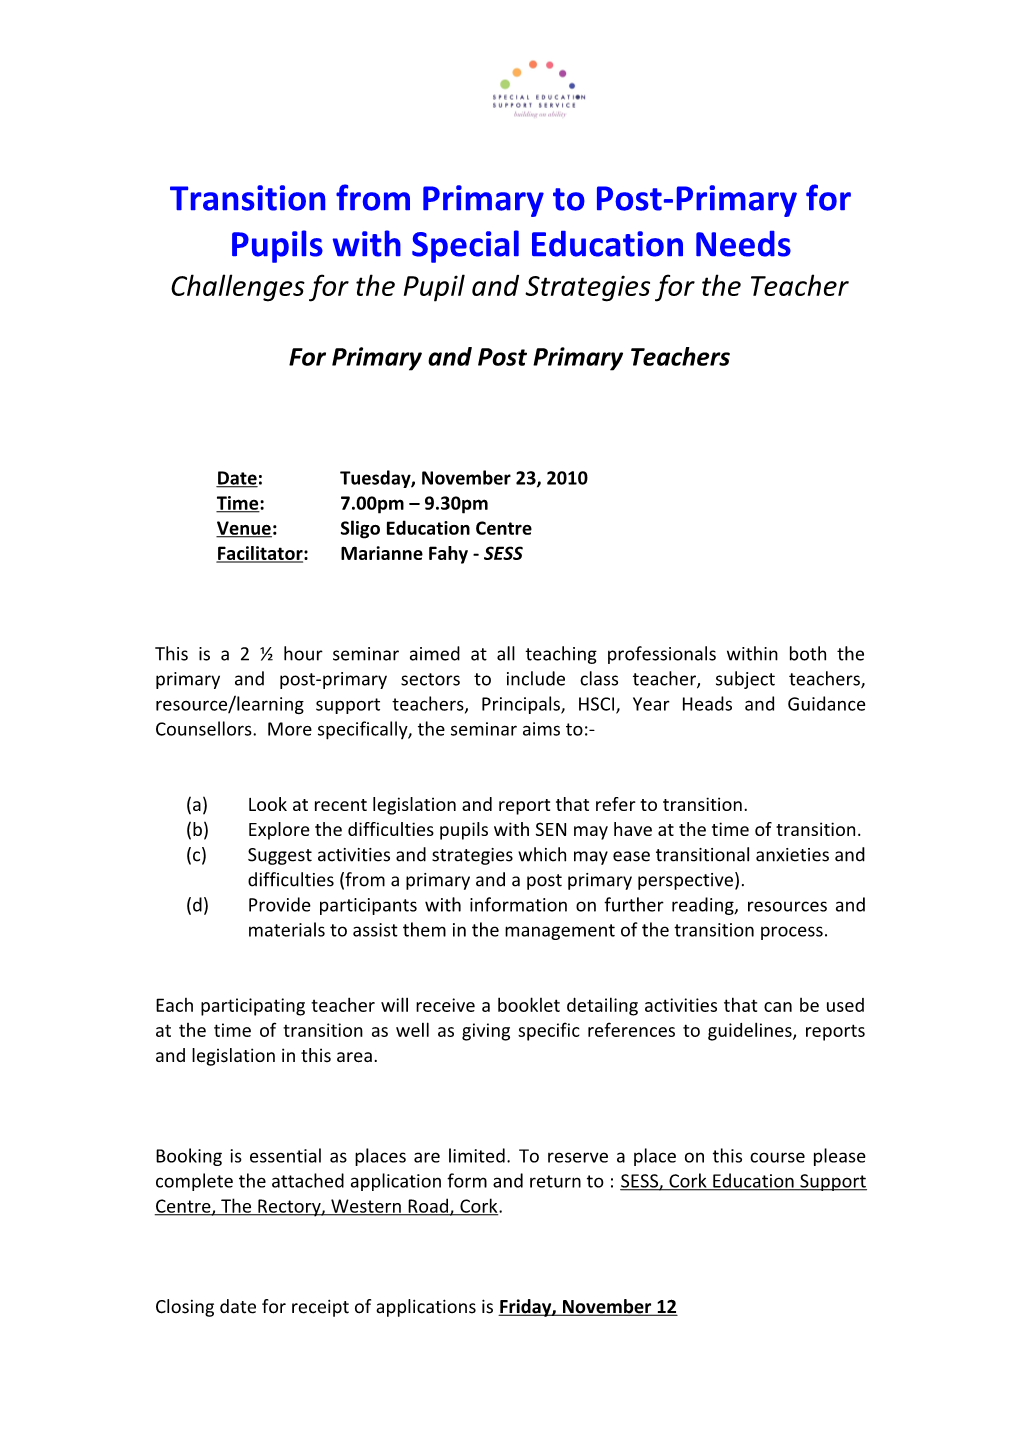 Transition from Primary to Post-Primary for Pupils with Special Education Needs